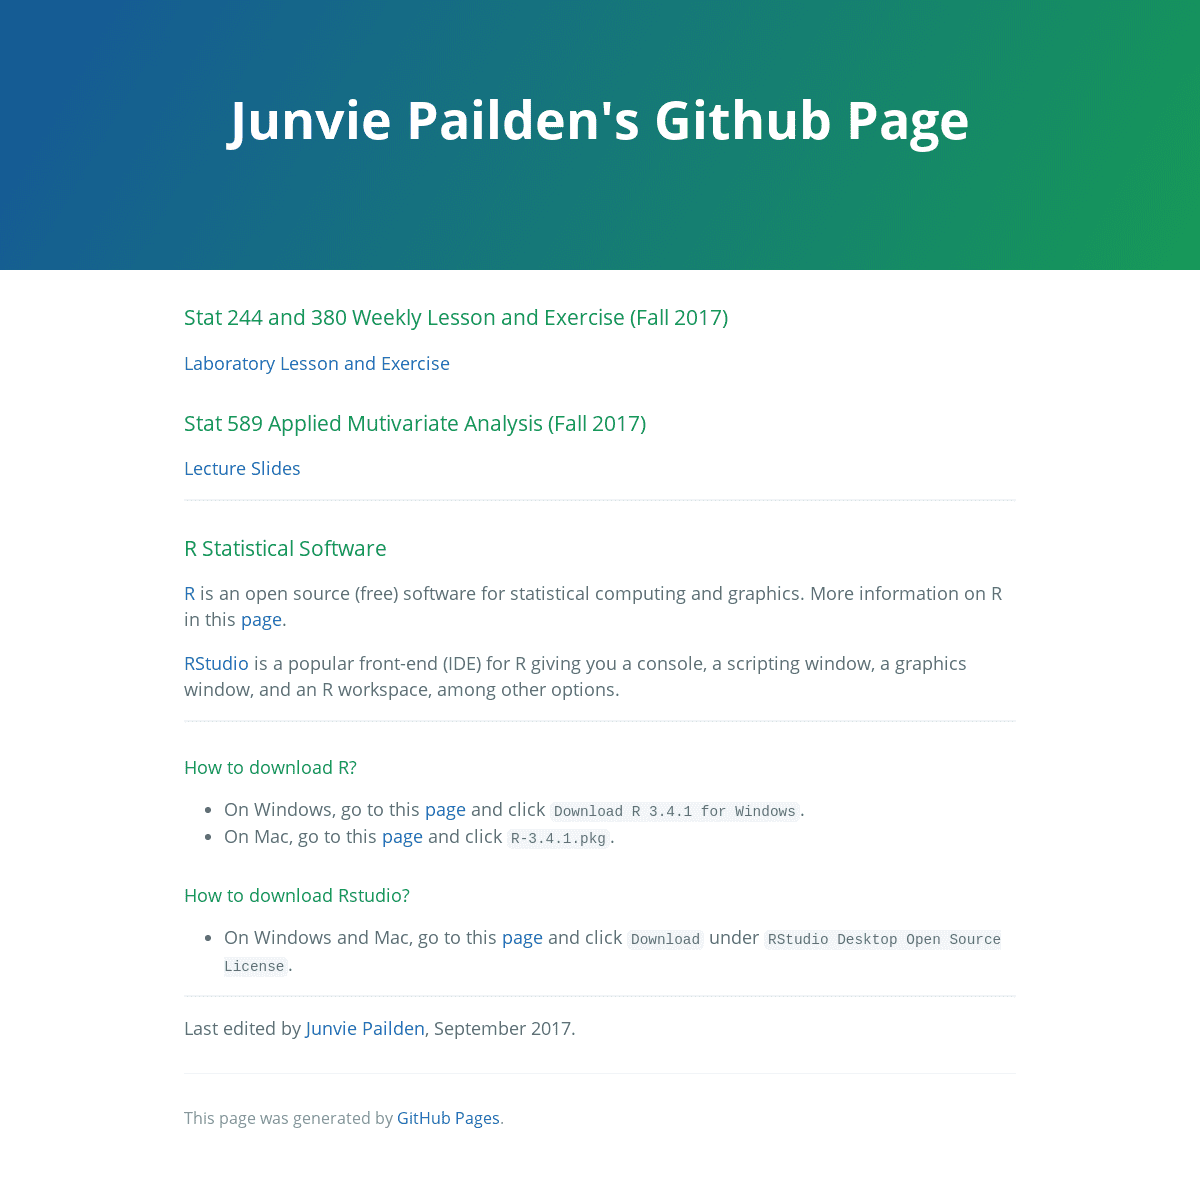 Stat 244 and 380 Weekly Lesson and Exercise (Fall 2017) | Junvie Pailden’s Github Page